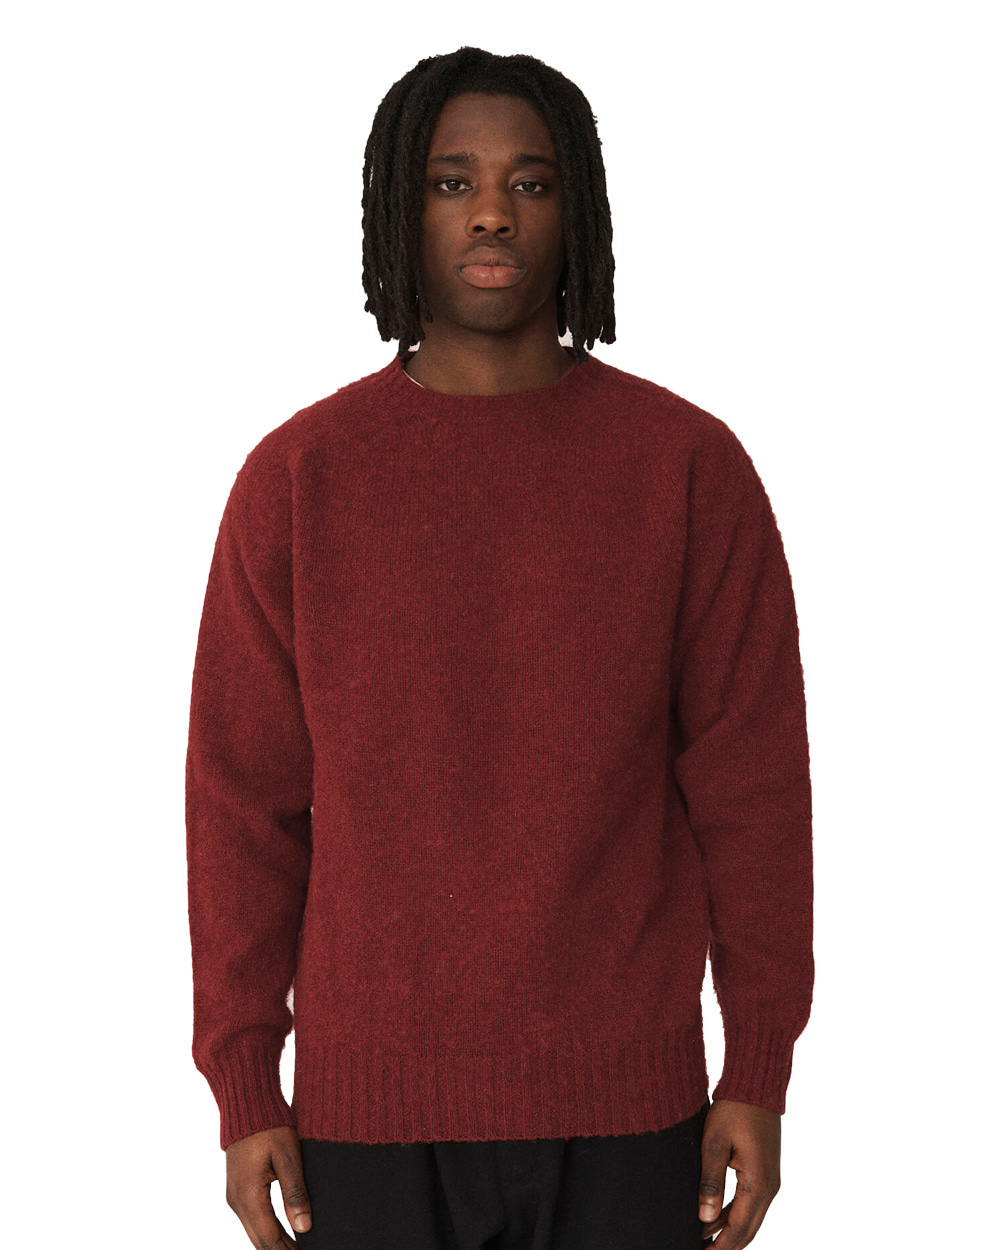 Suedehead Crew Neck Knit (Red)